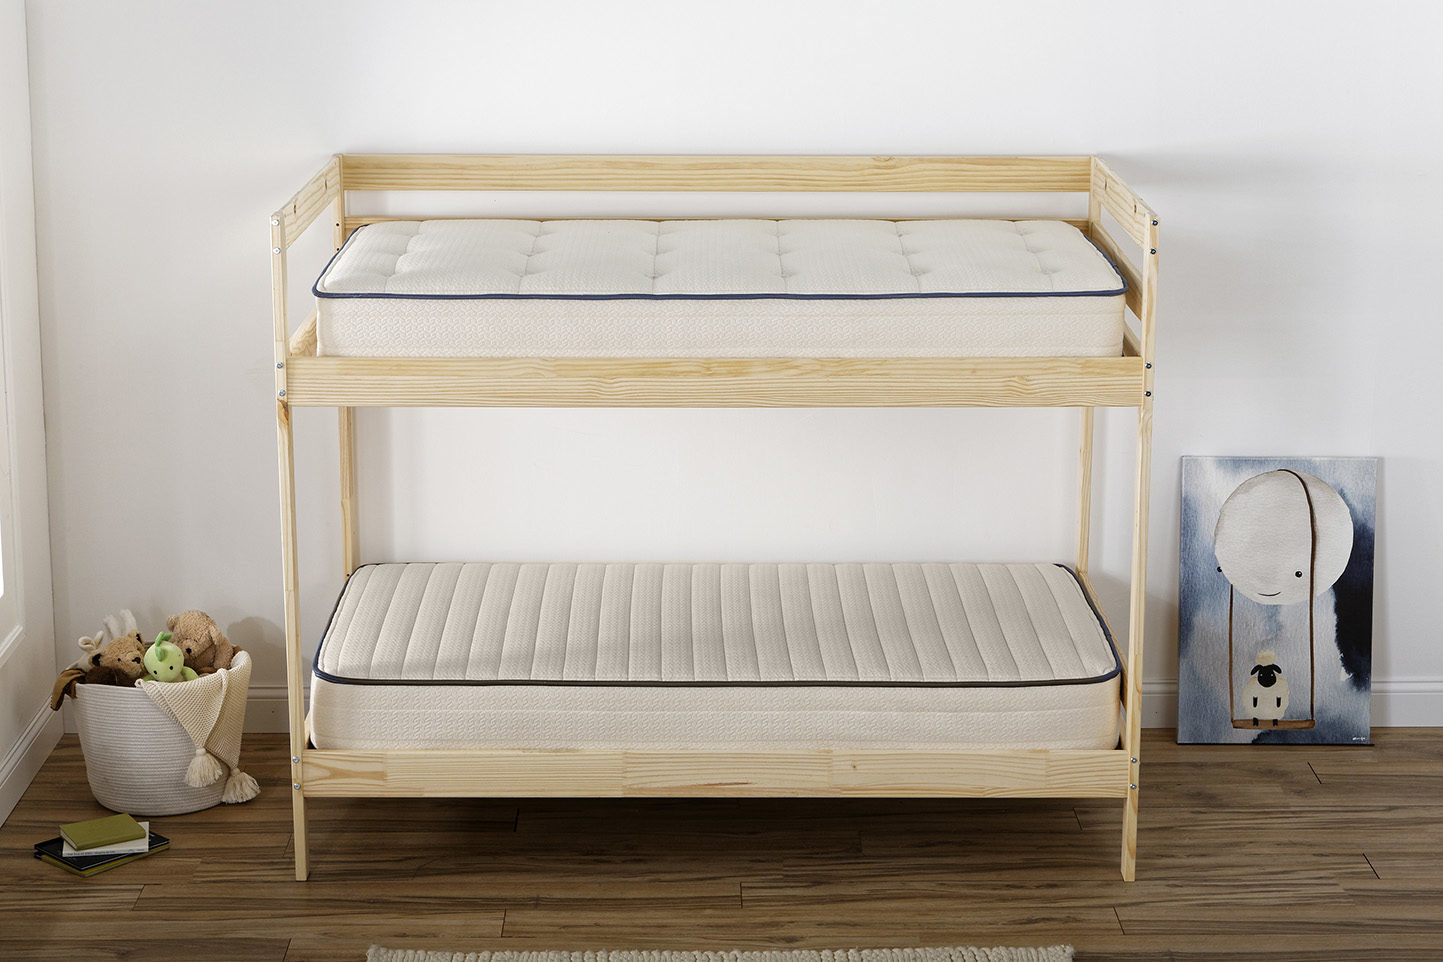 Kiwi Bunk Bed Mattresses, What Kind Of Mattress For Bunk Beds